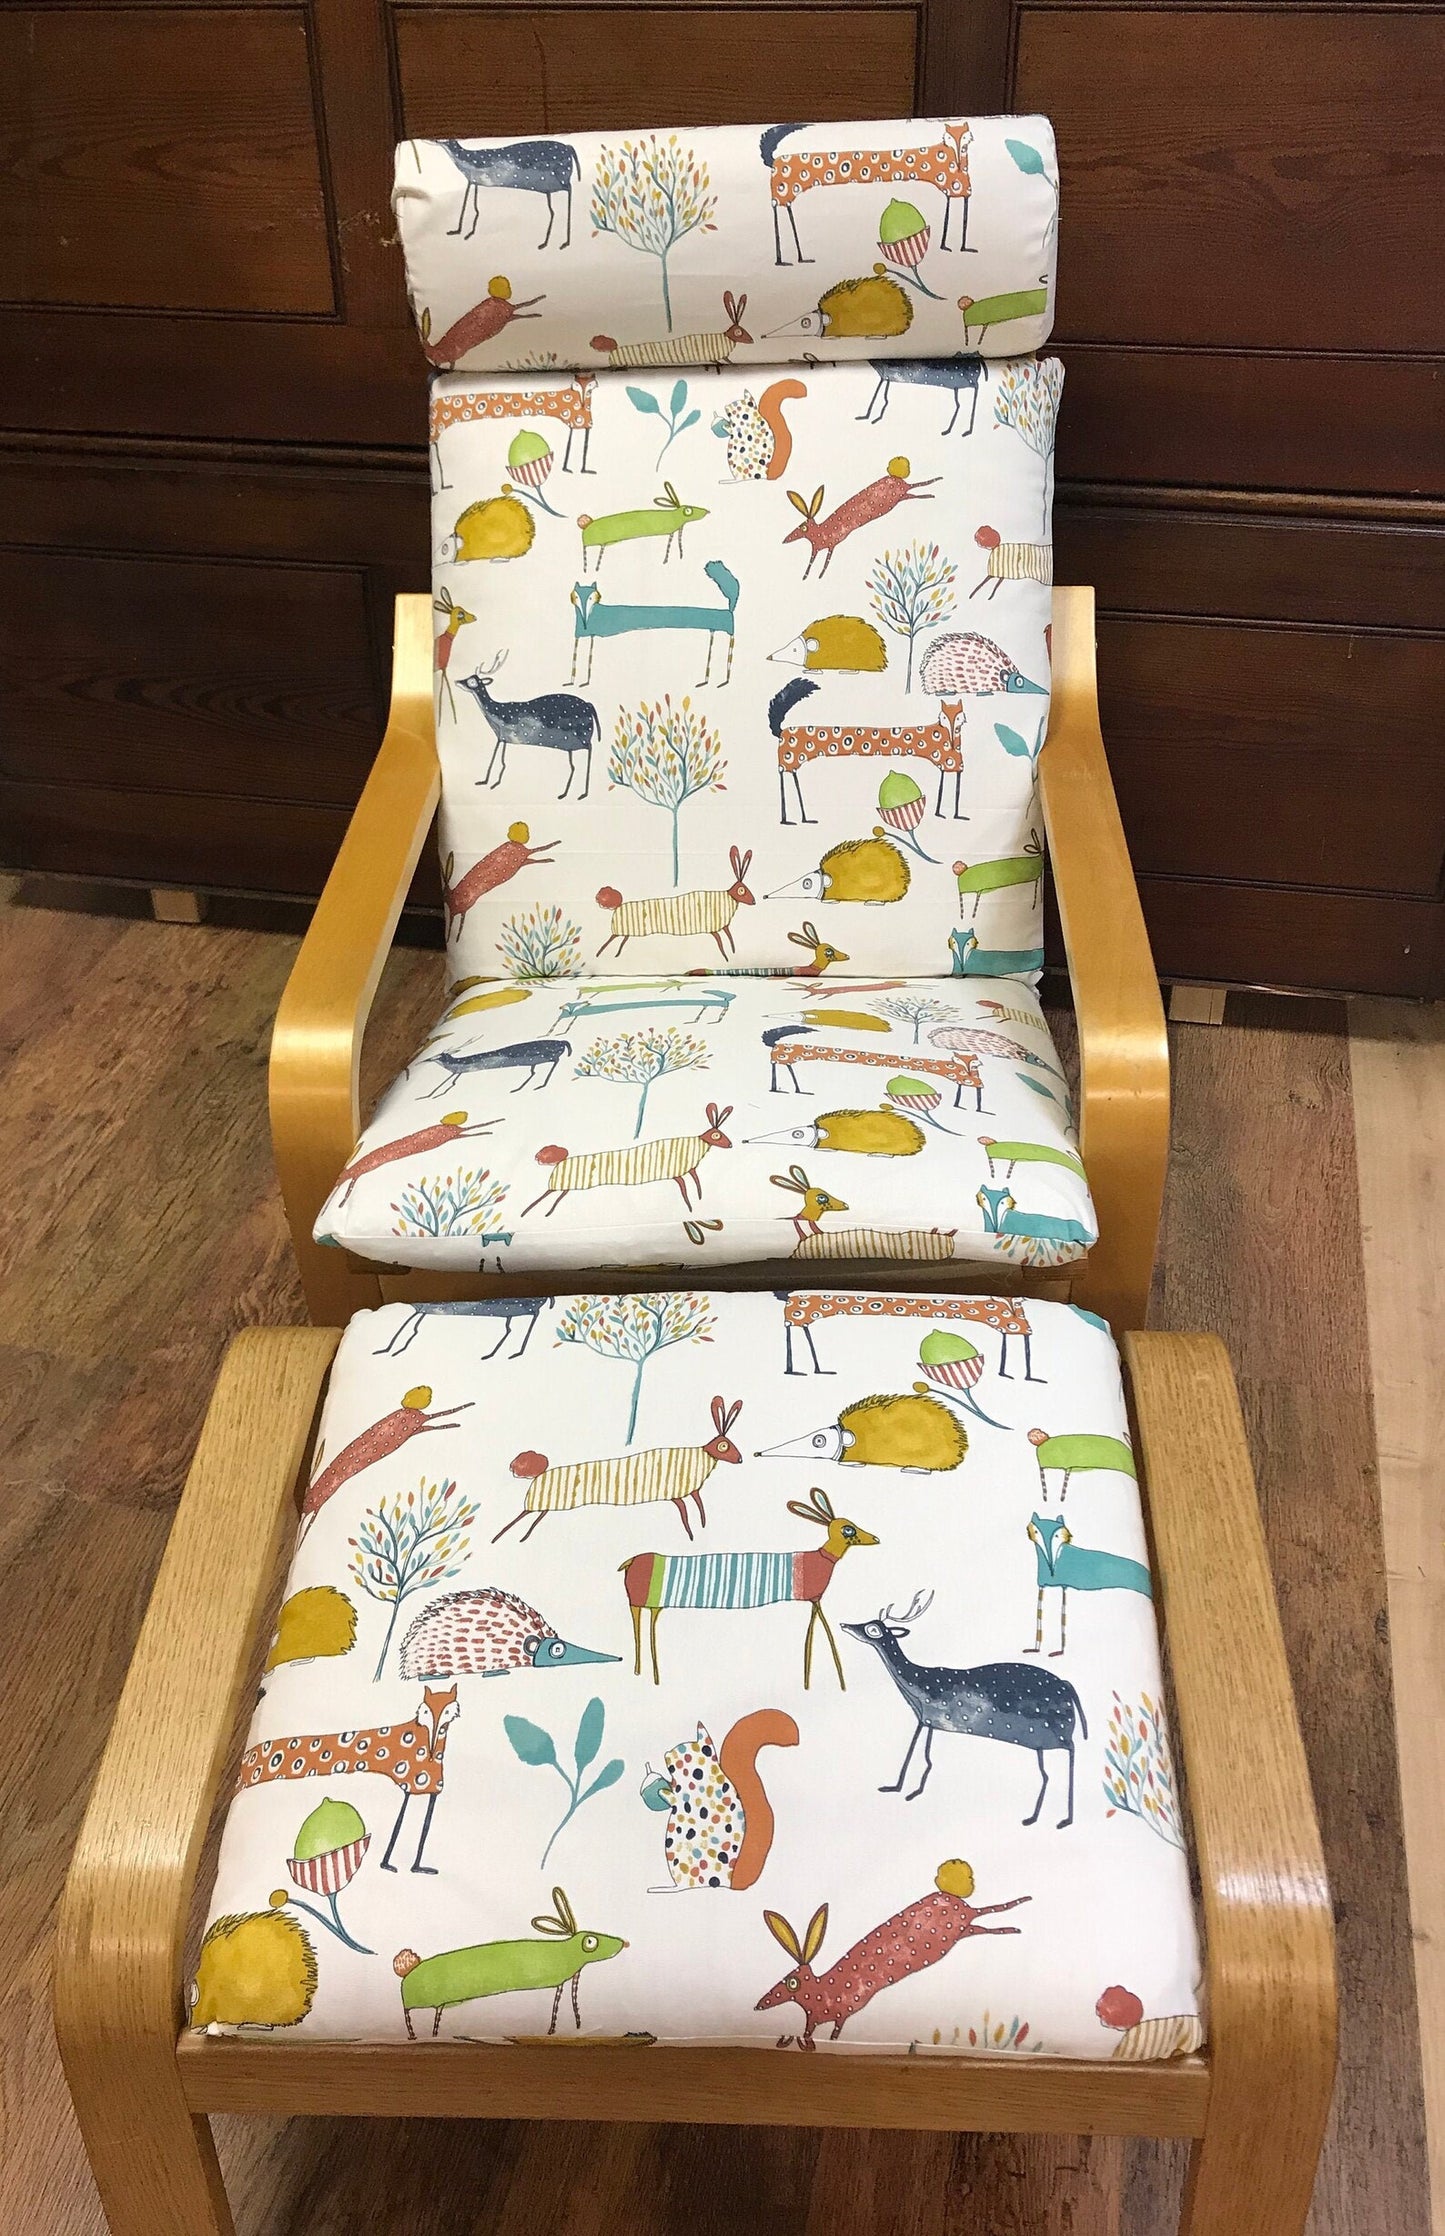 IKEA Poang chair cover. Custom handmade covers made in Organic cotton fabric